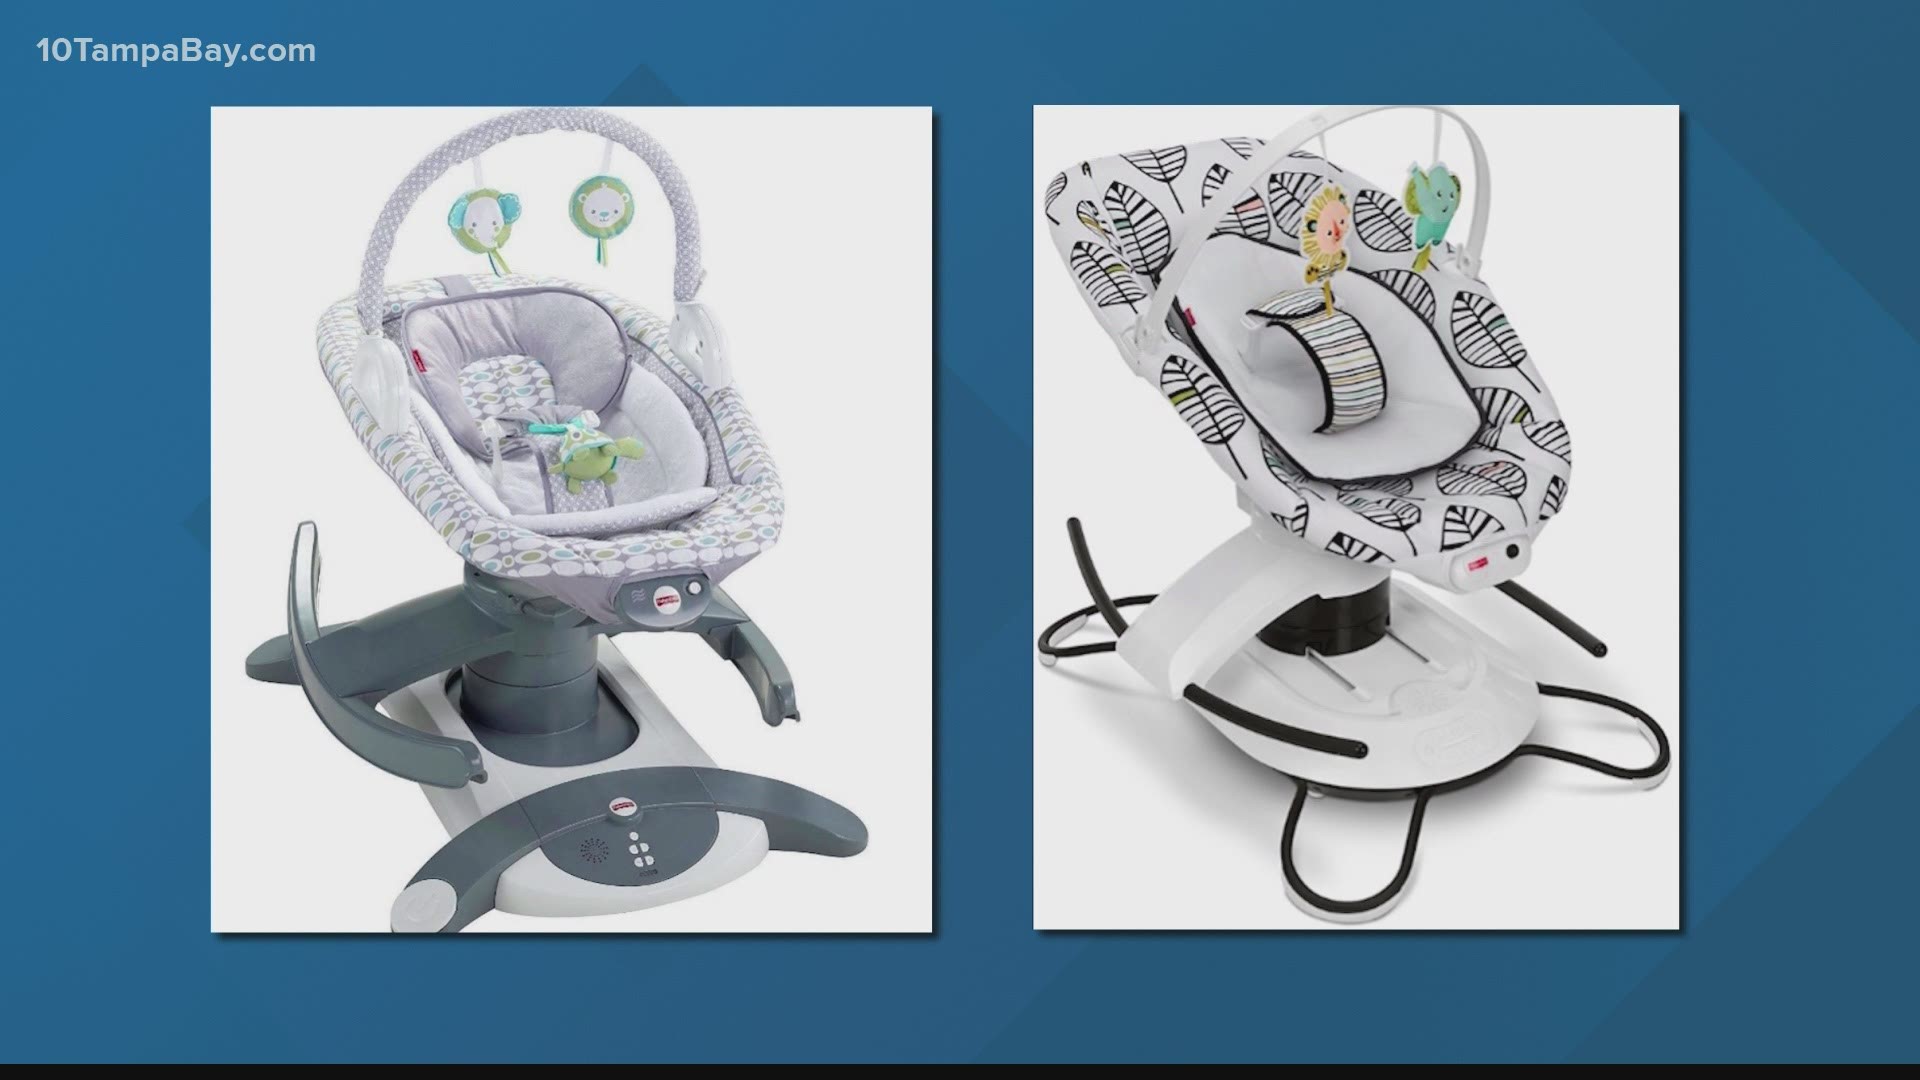 Two kinds of Fisher-Price infant gliders sold at specialty stores and Walmart, Target and Amazon.com are being recalled after the deaths of four infants.